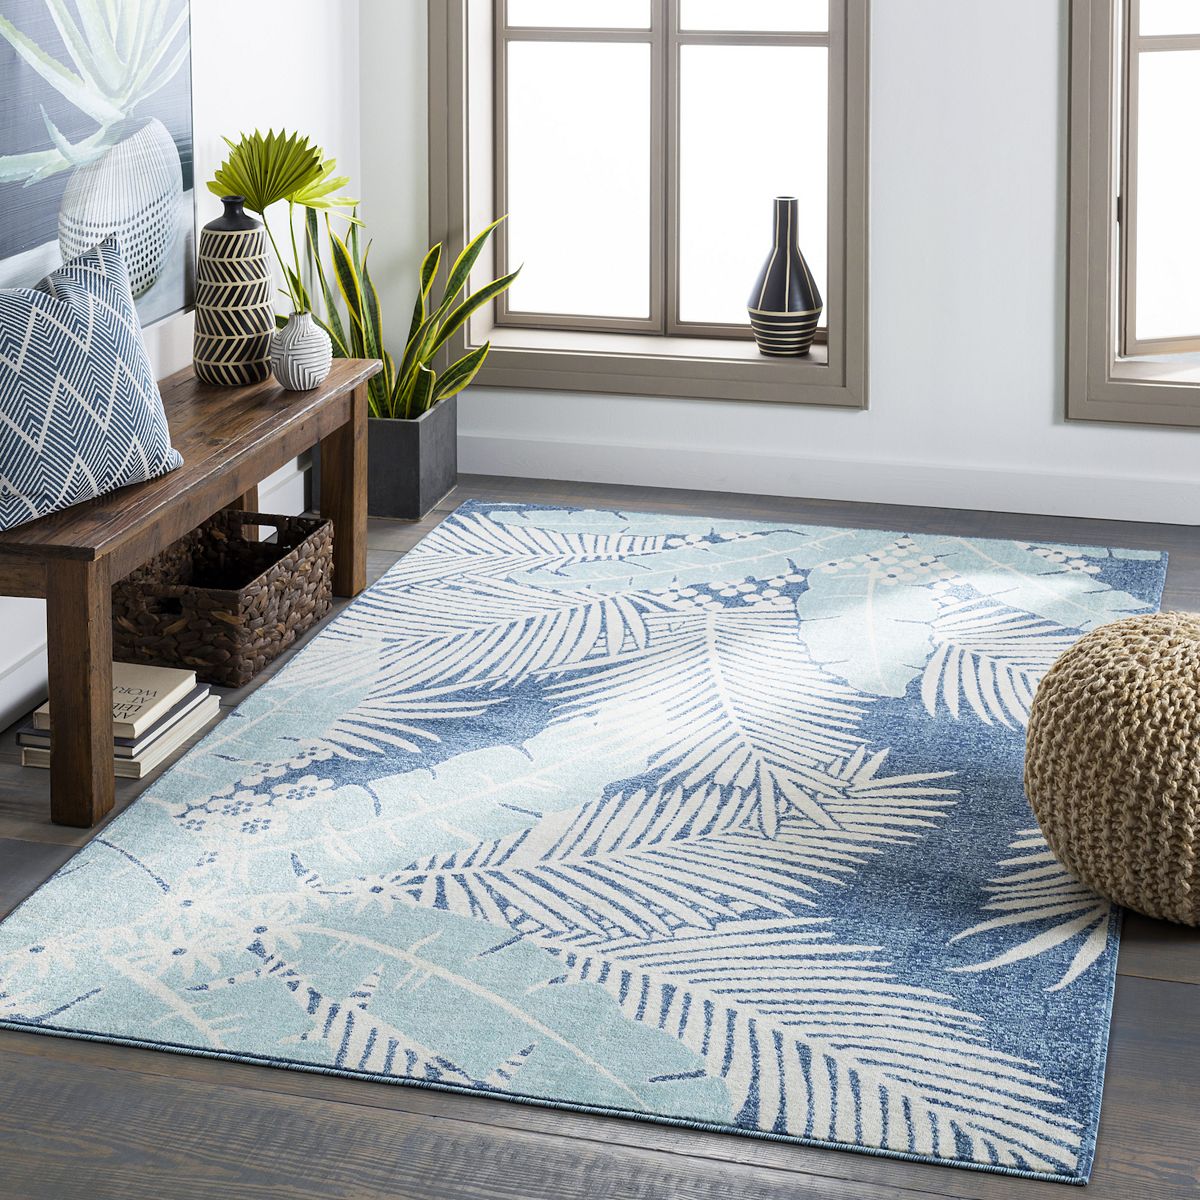 Coastal Rugs How To Pick The Best Area, Beach House Rugs